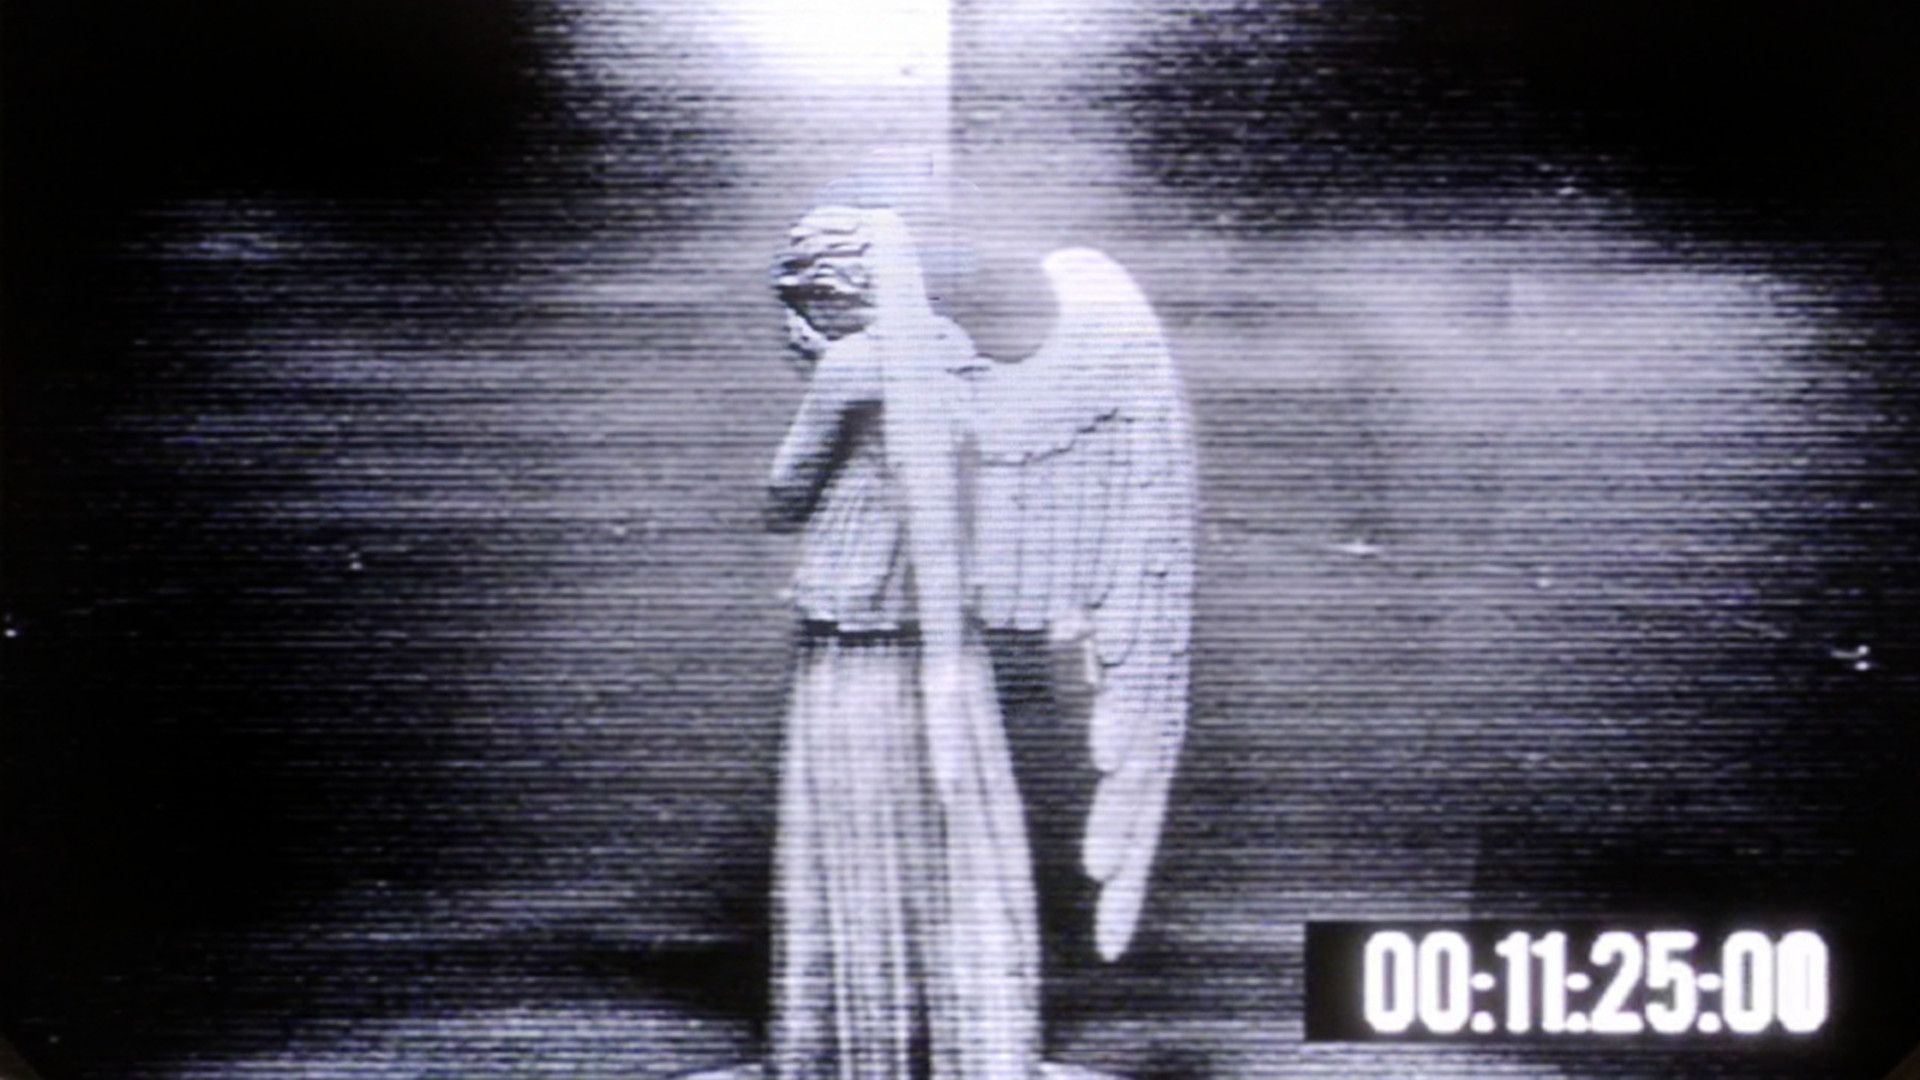 1920x1080 Weeping Angels wallpapers. Set it to change every few seconds for some fun.  - Album on Imgur